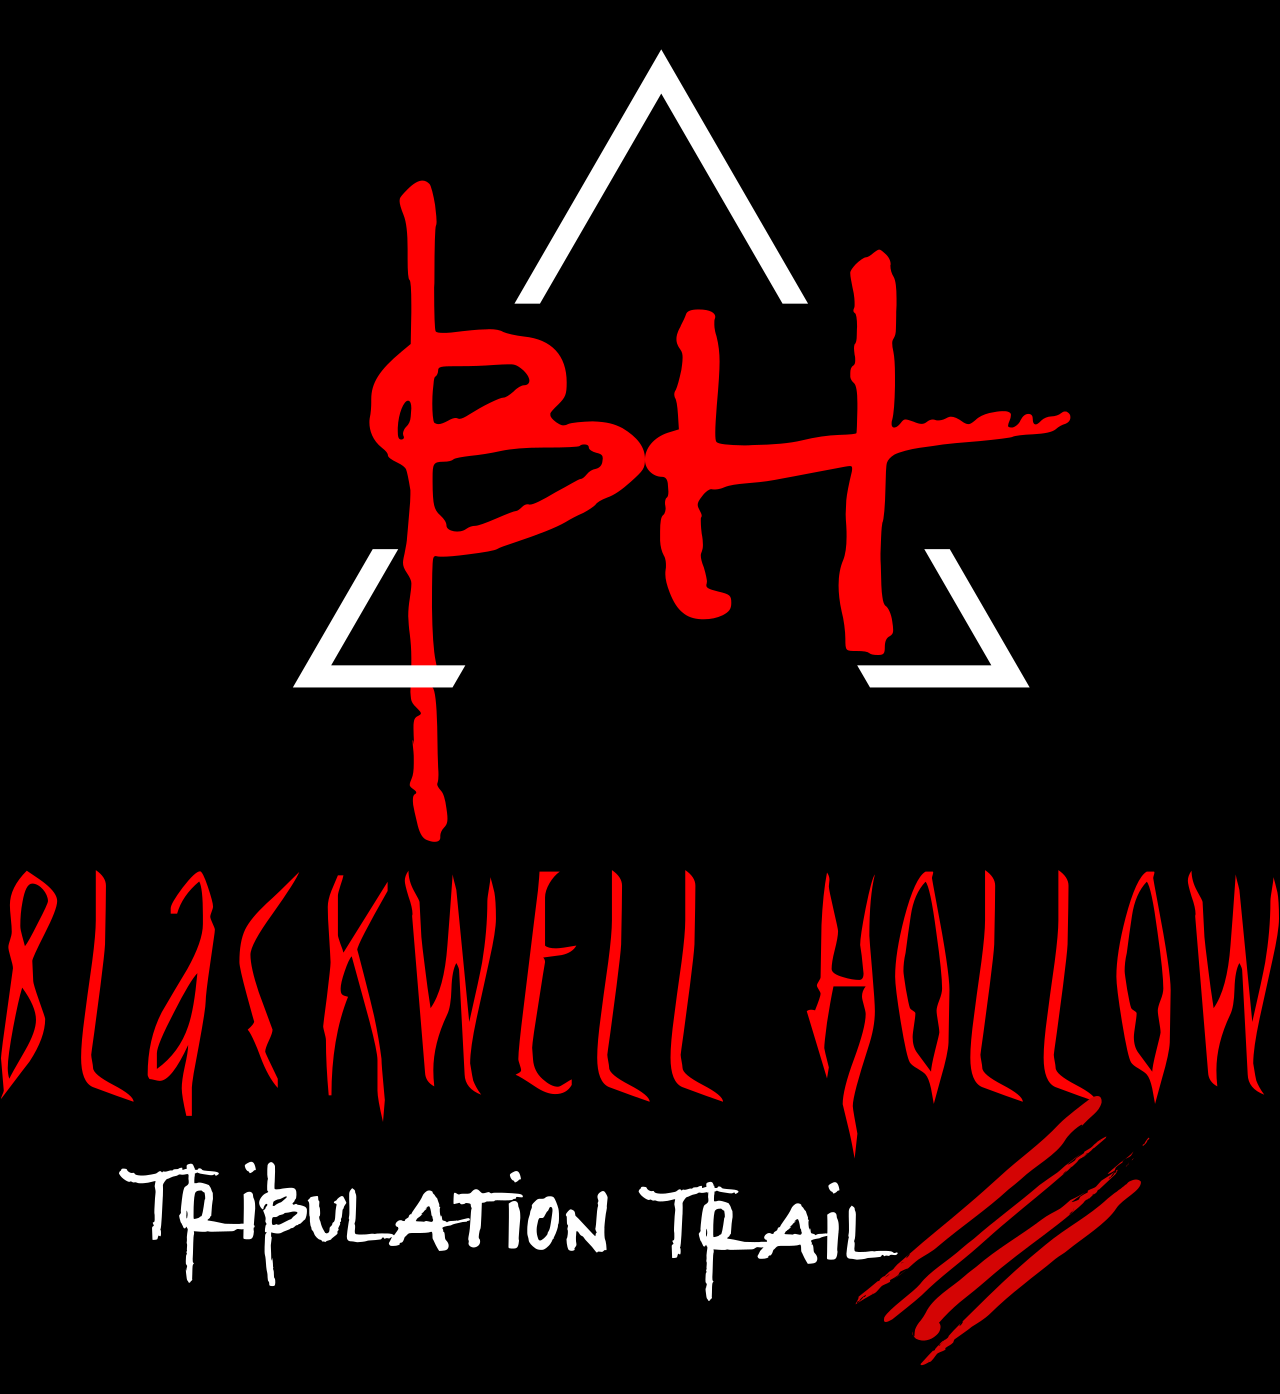 Blackwell Hollow's web page